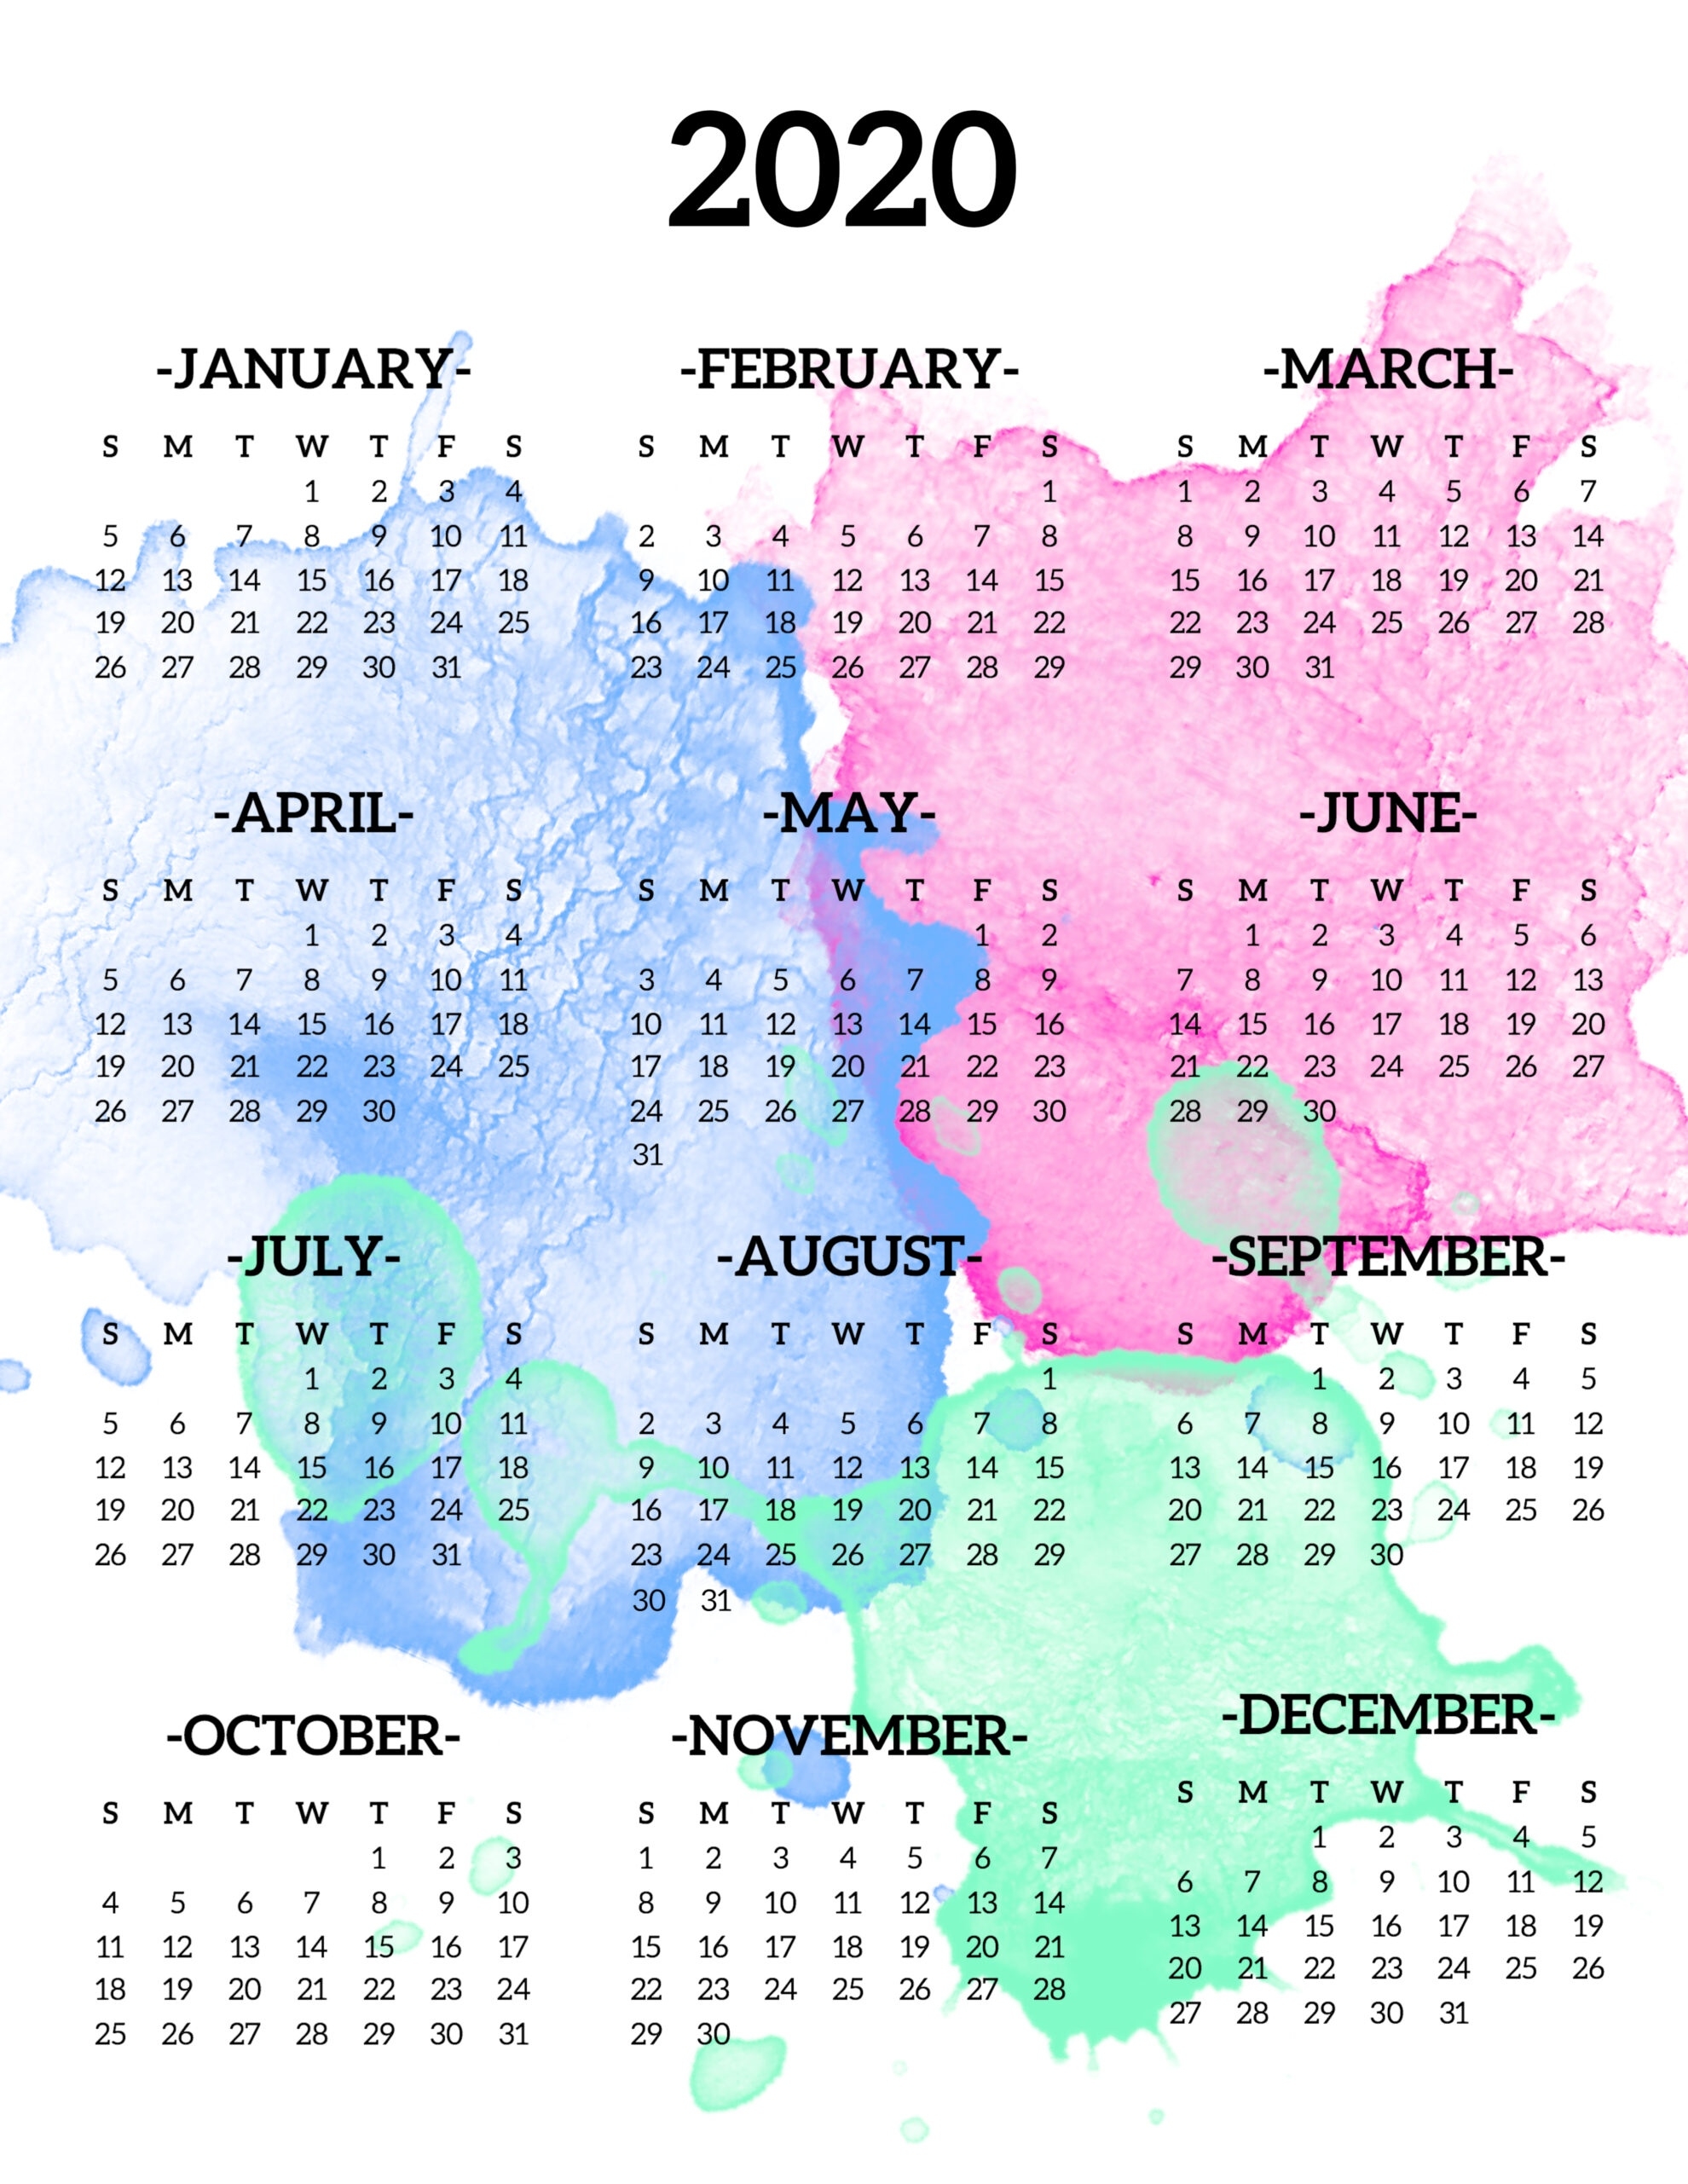 Calendar 2020 Printable One Page | Paper Trail Design Calendar Template Year At A Glance